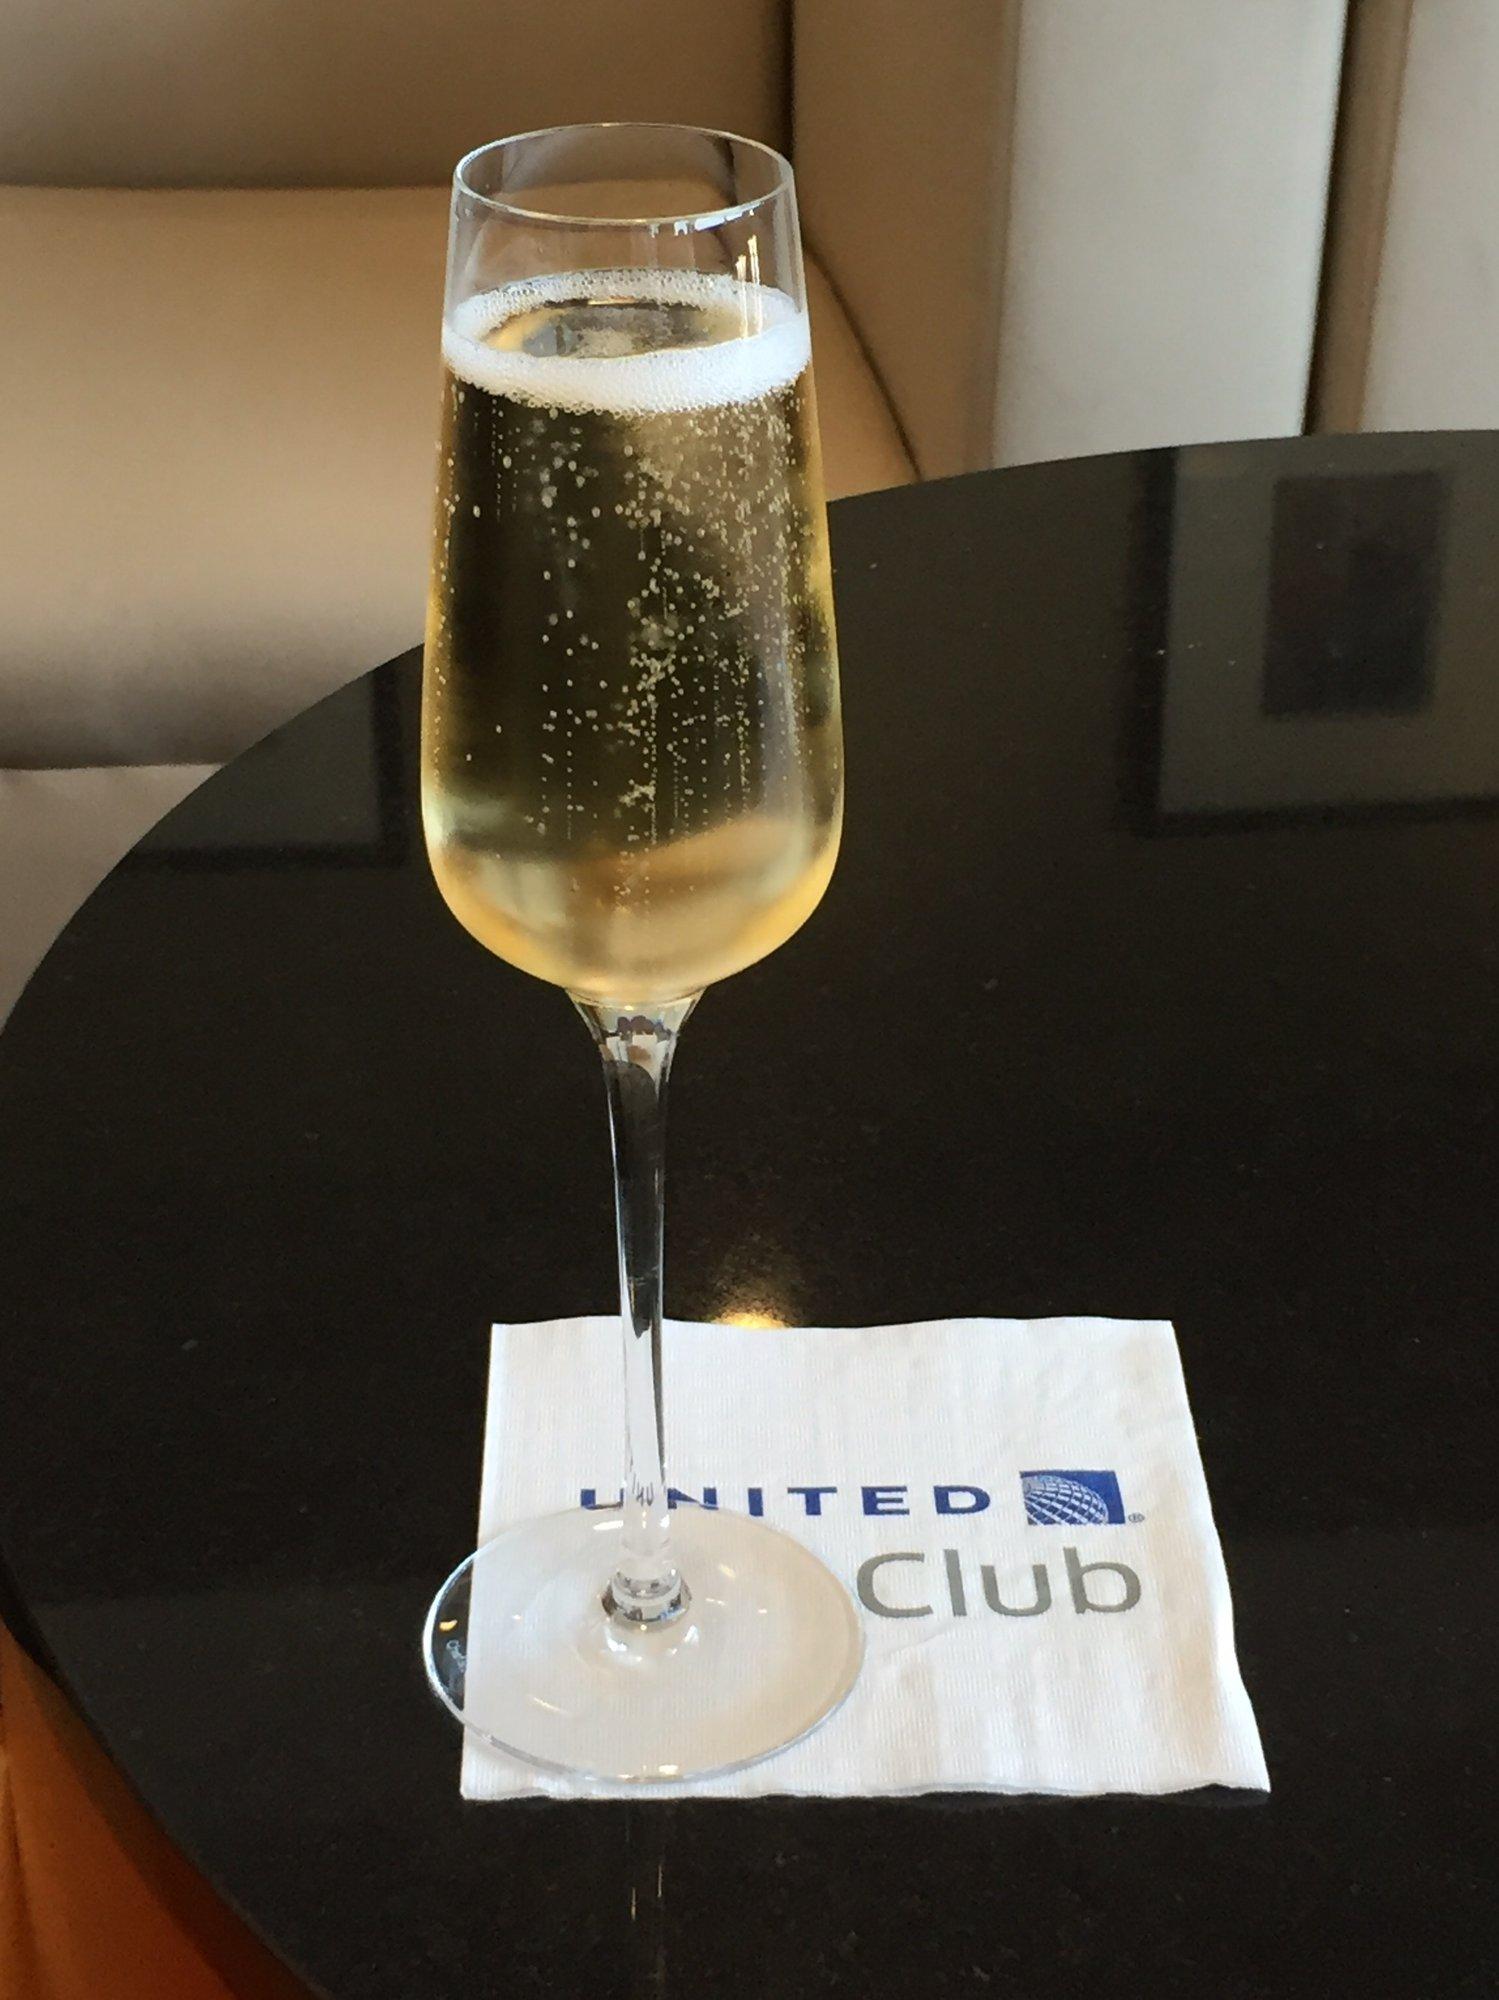 United Airlines United Club image 1 of 22